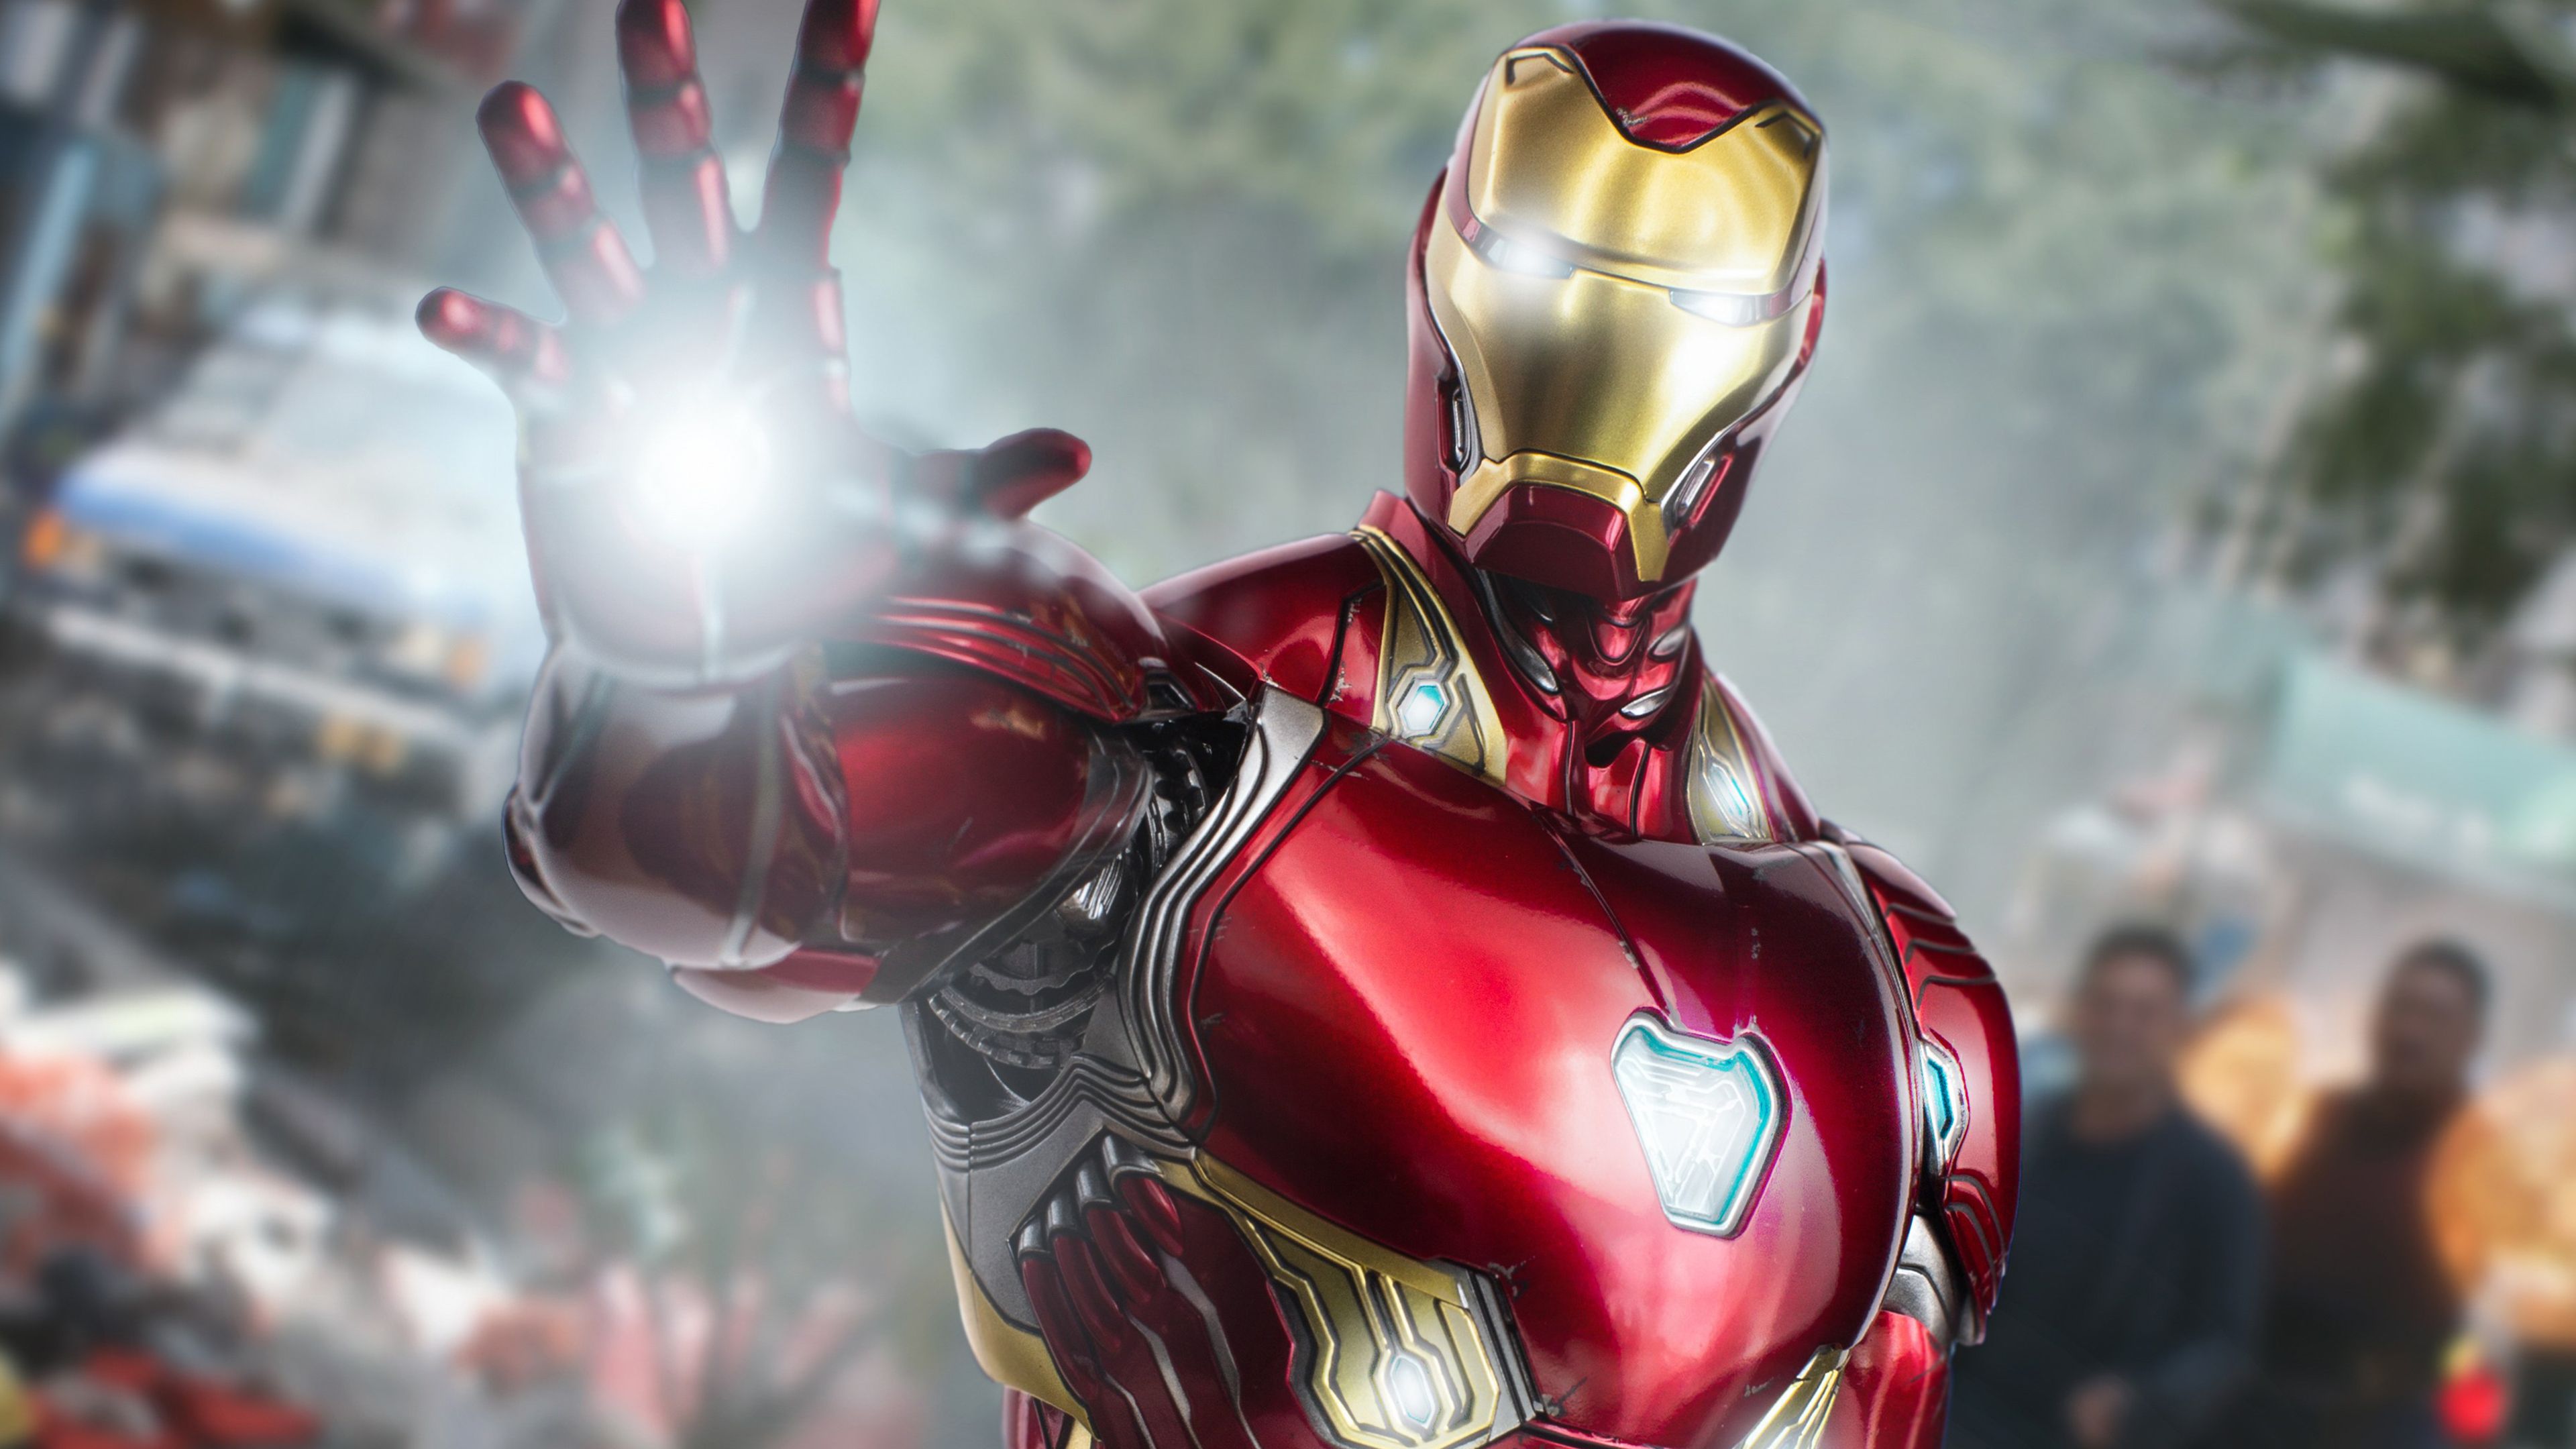 Iron Man laptop 4k wallpaper Resolution 3840x2160 | Best Download this awesome wallpaper - Cool Wallpaper HD - CoolWallpaper-HD.com